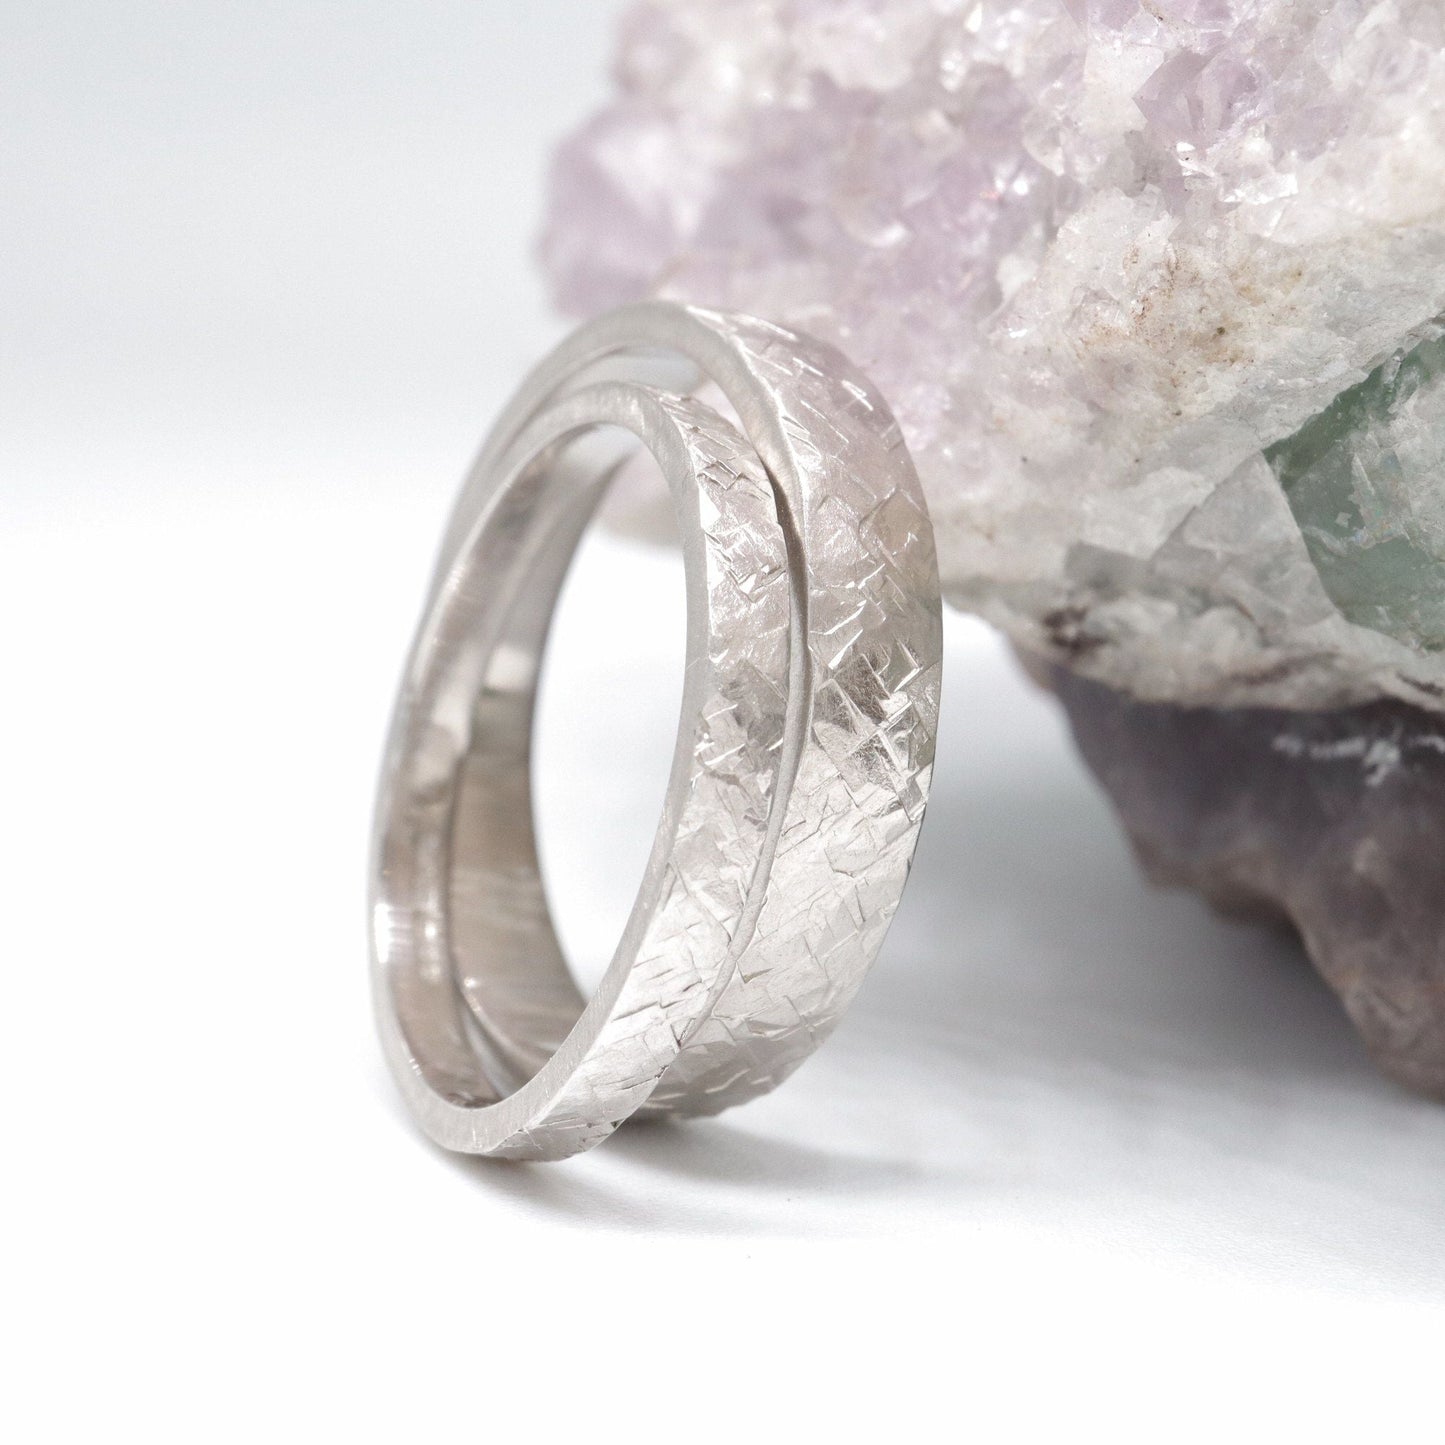 Silver matching Kendal rustic 2mm and 4mm wedding ring set - flat textured hammered design.